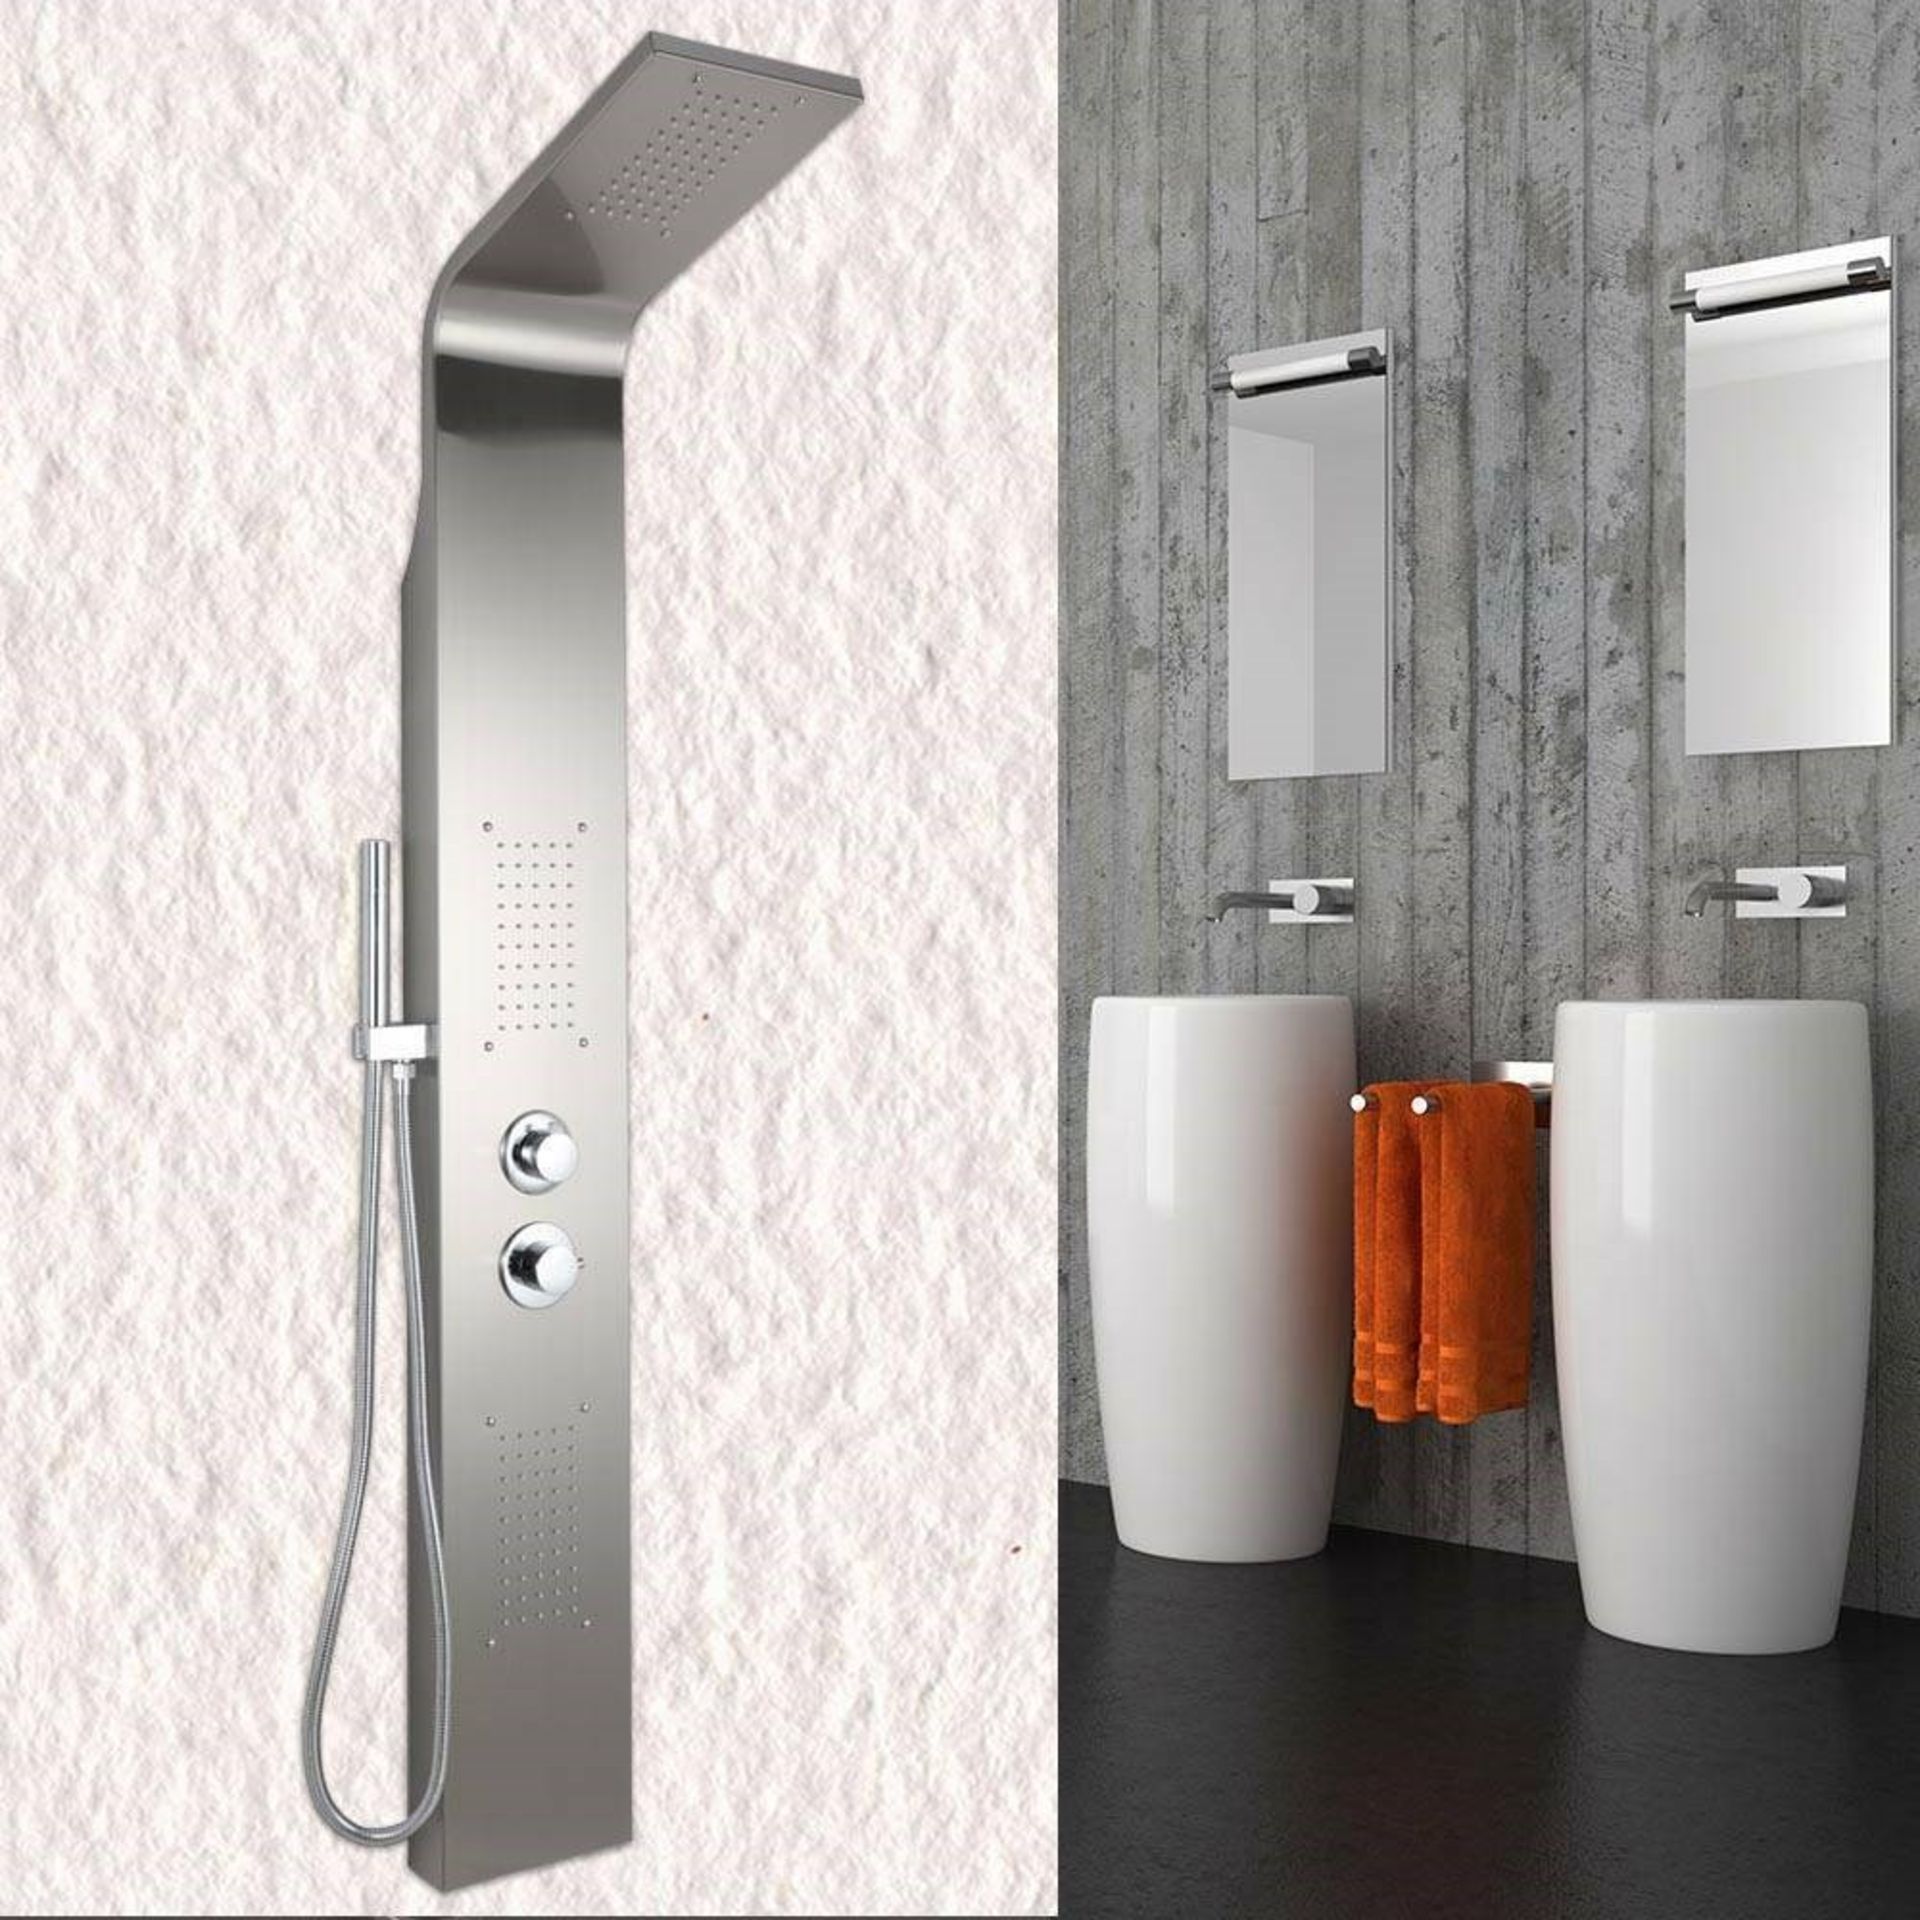 NEW (NS2) Chrome Modern Bathroom Shower Column Tower Panel System With Hand held Massage Jets.... - Image 2 of 3